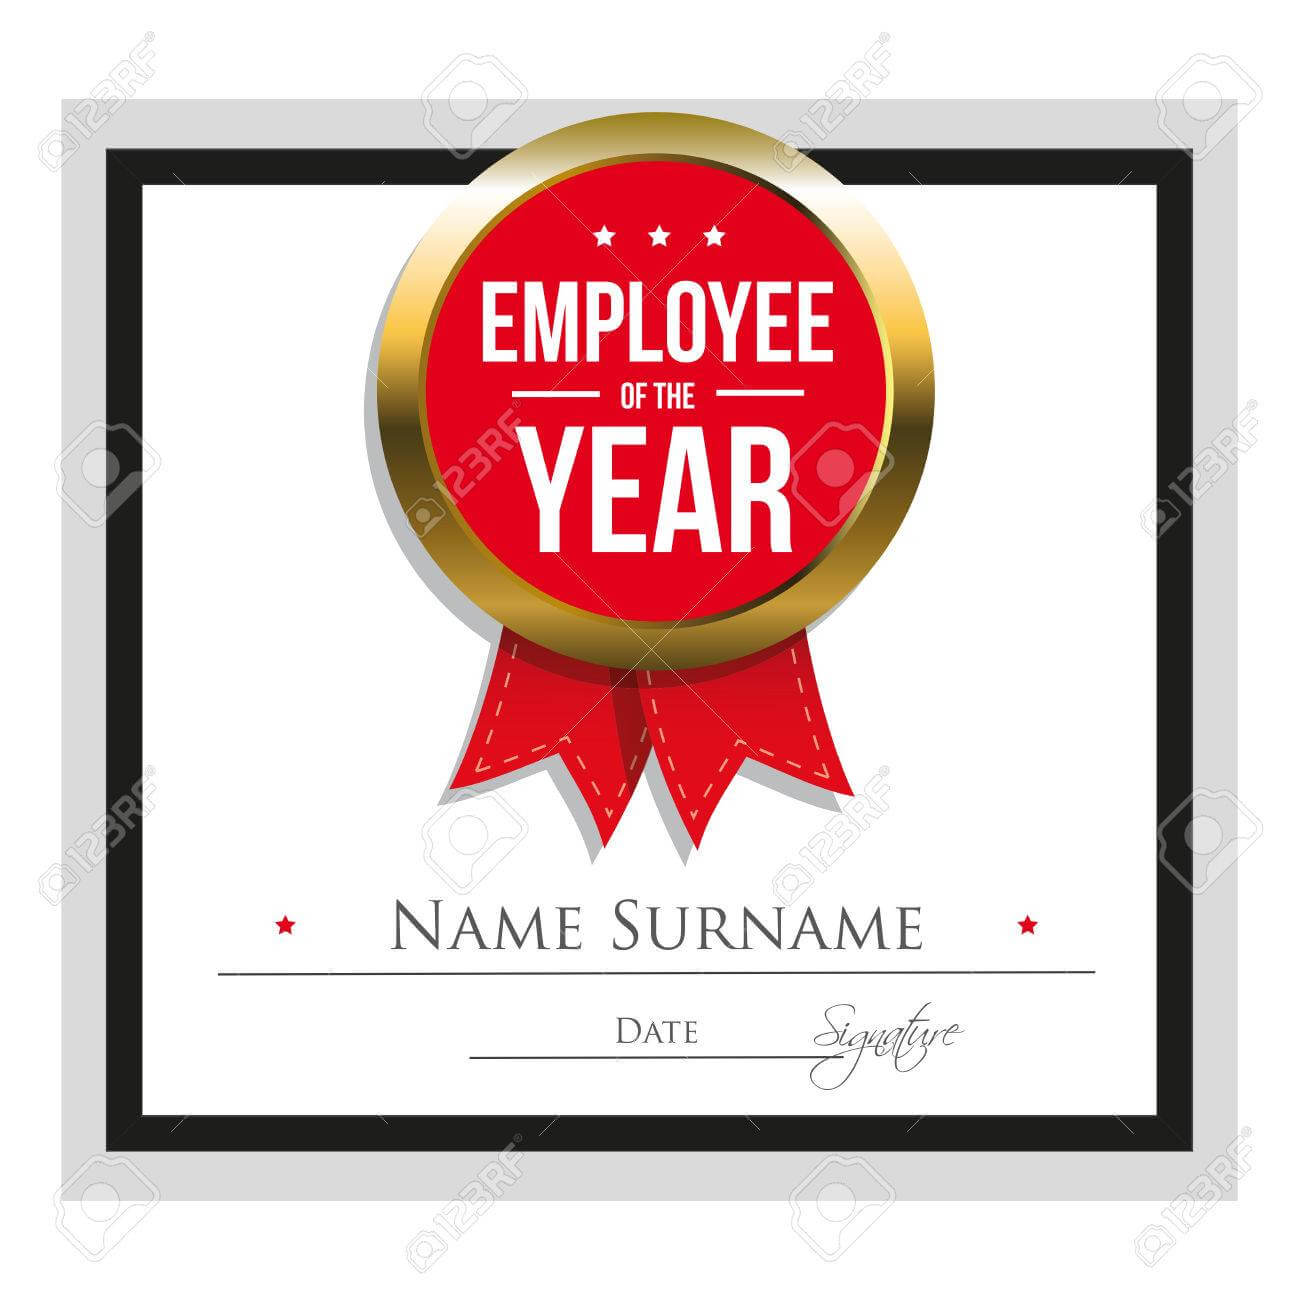 Employee Of The Year Certificate Template Free - Calep For Employee Of The Year Certificate Template Free